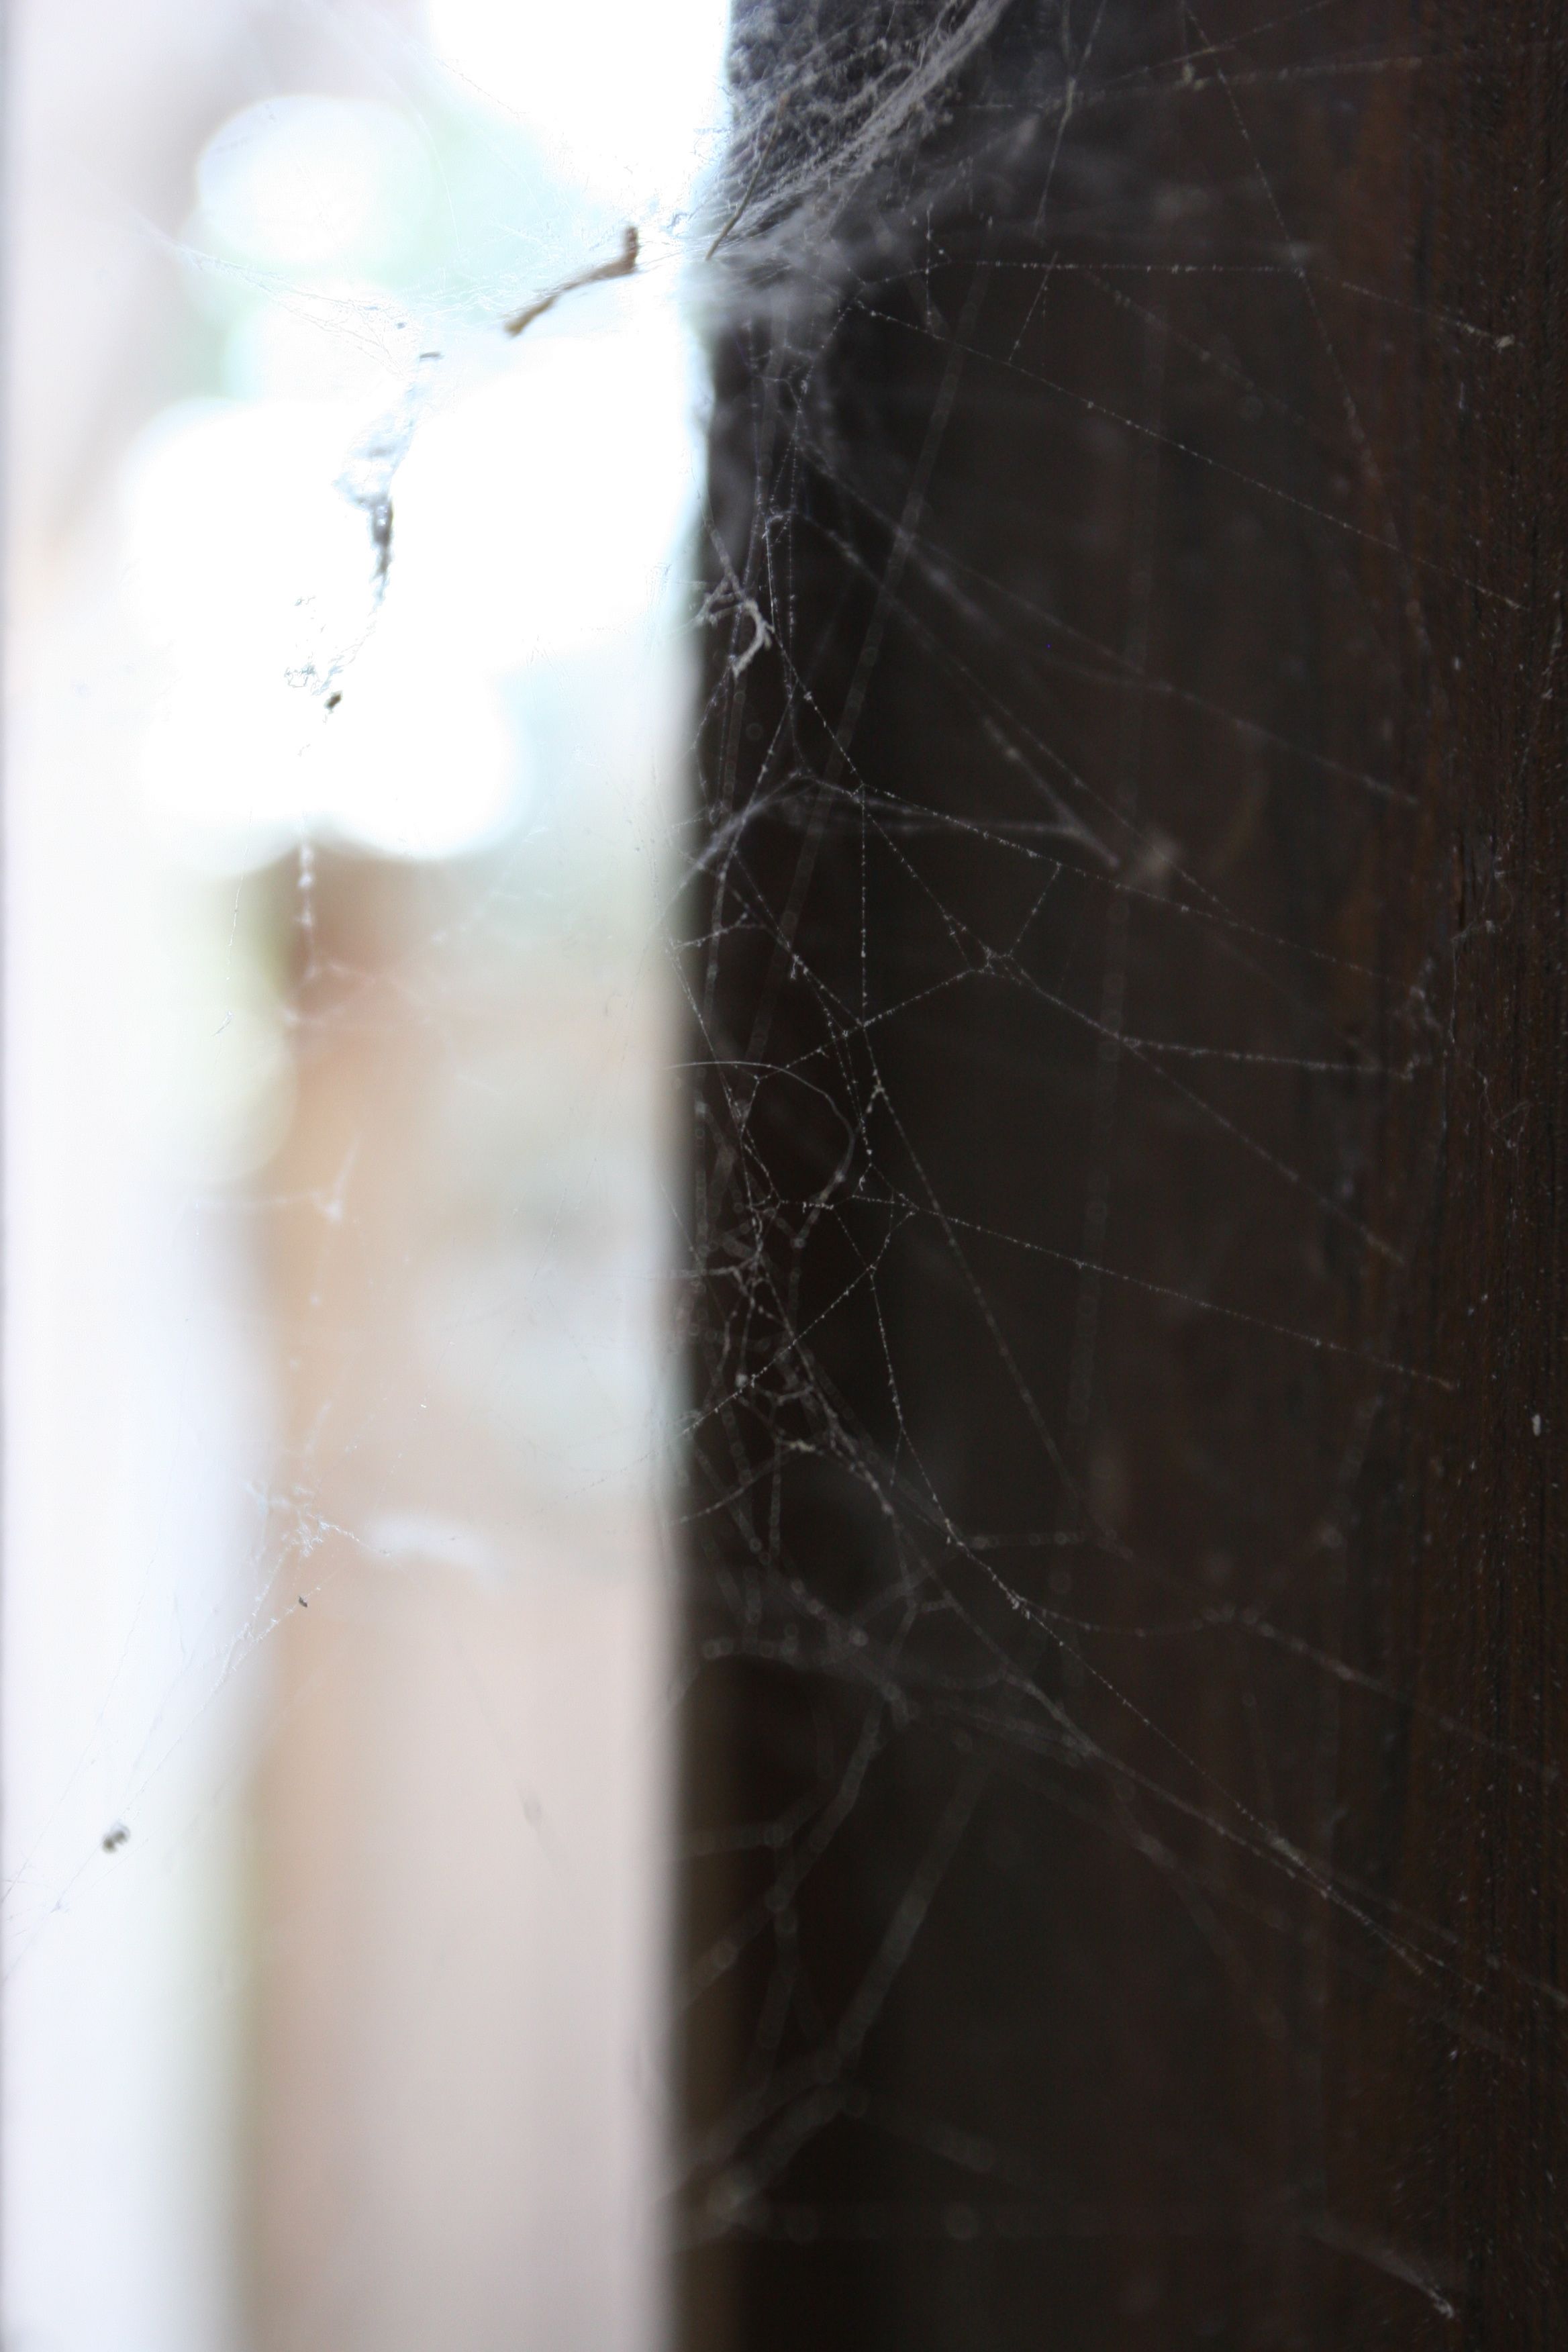 Beauty shot! Spider webs in the garage. Wished for a macro lens at this point.